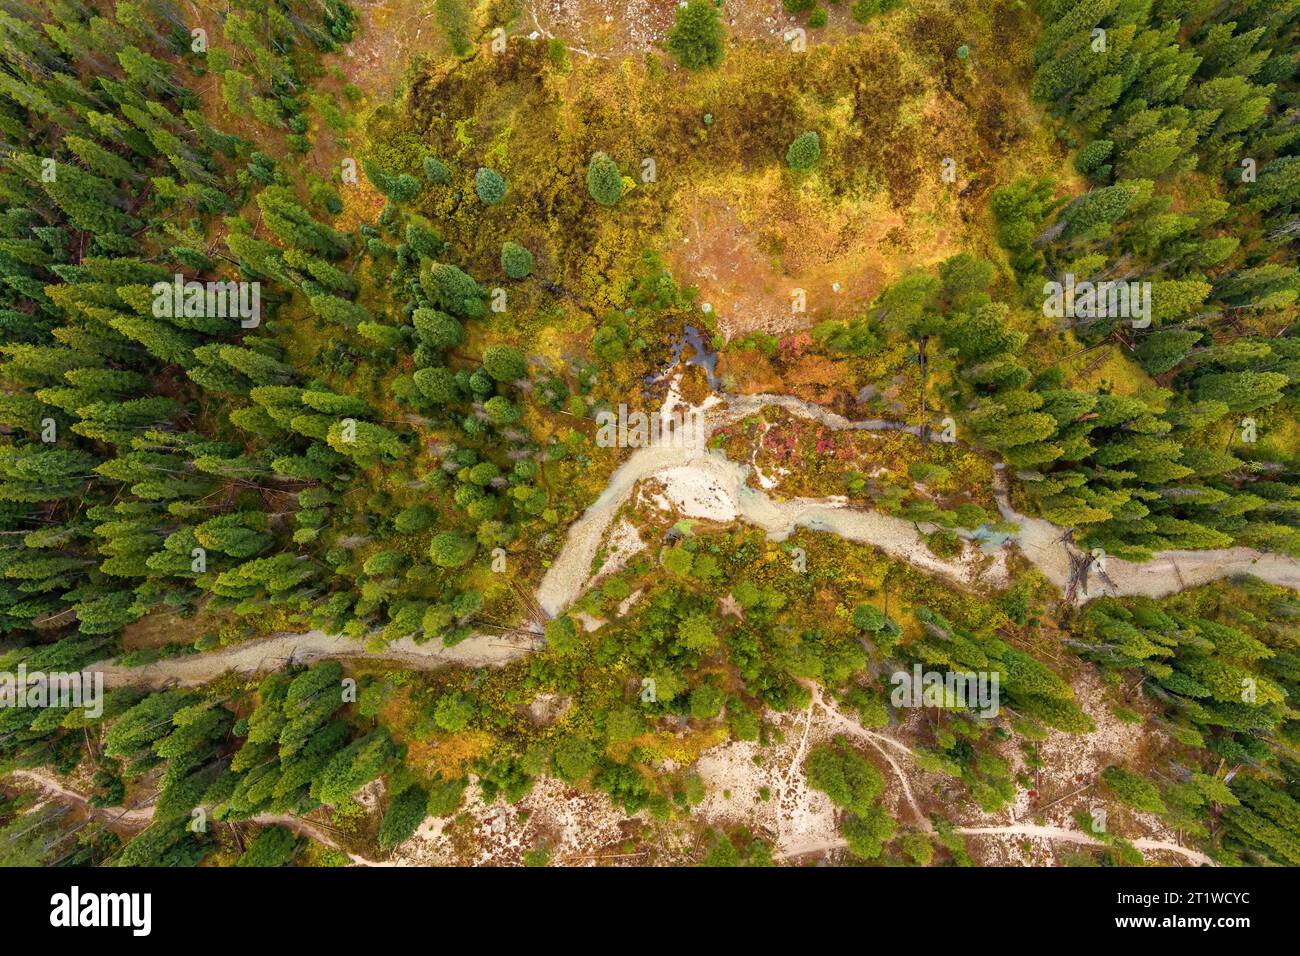 Stream winds through a greed forest as seen from above Stock Photo